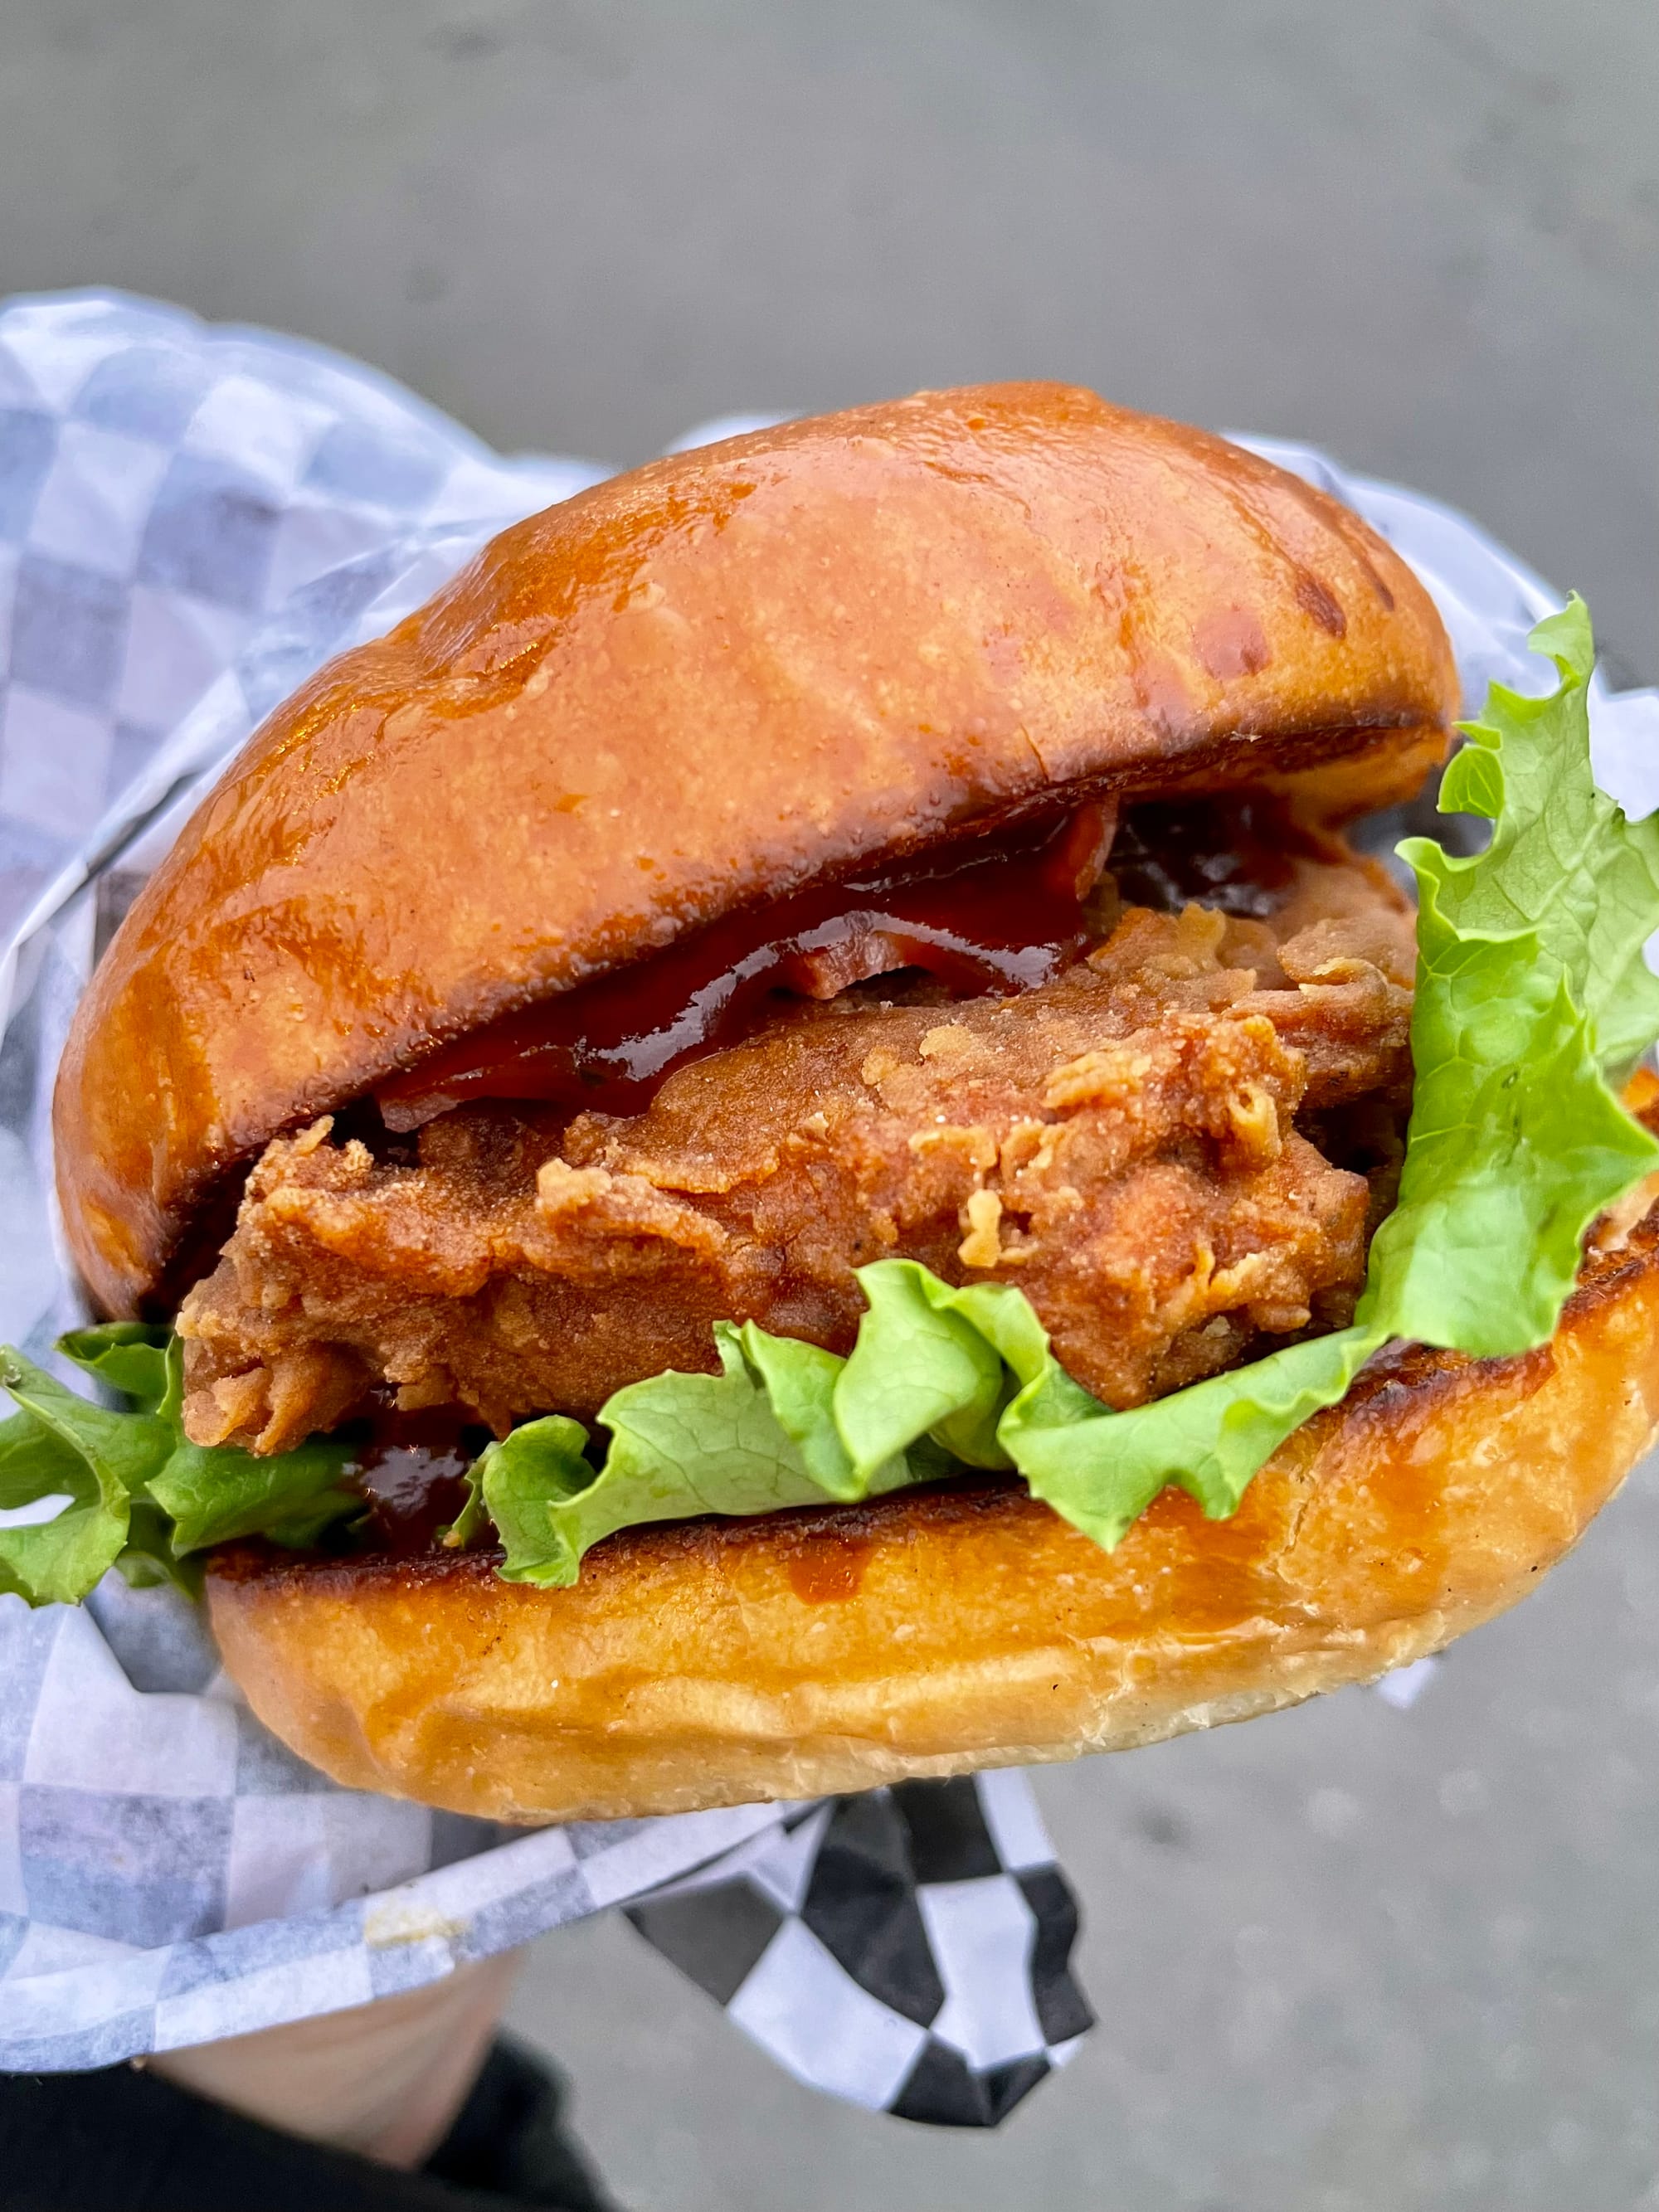 super-crunchy and craggy La Lulu chick’n sandwich (with bacon and BBQ sauce) from Malibu’s Burgers